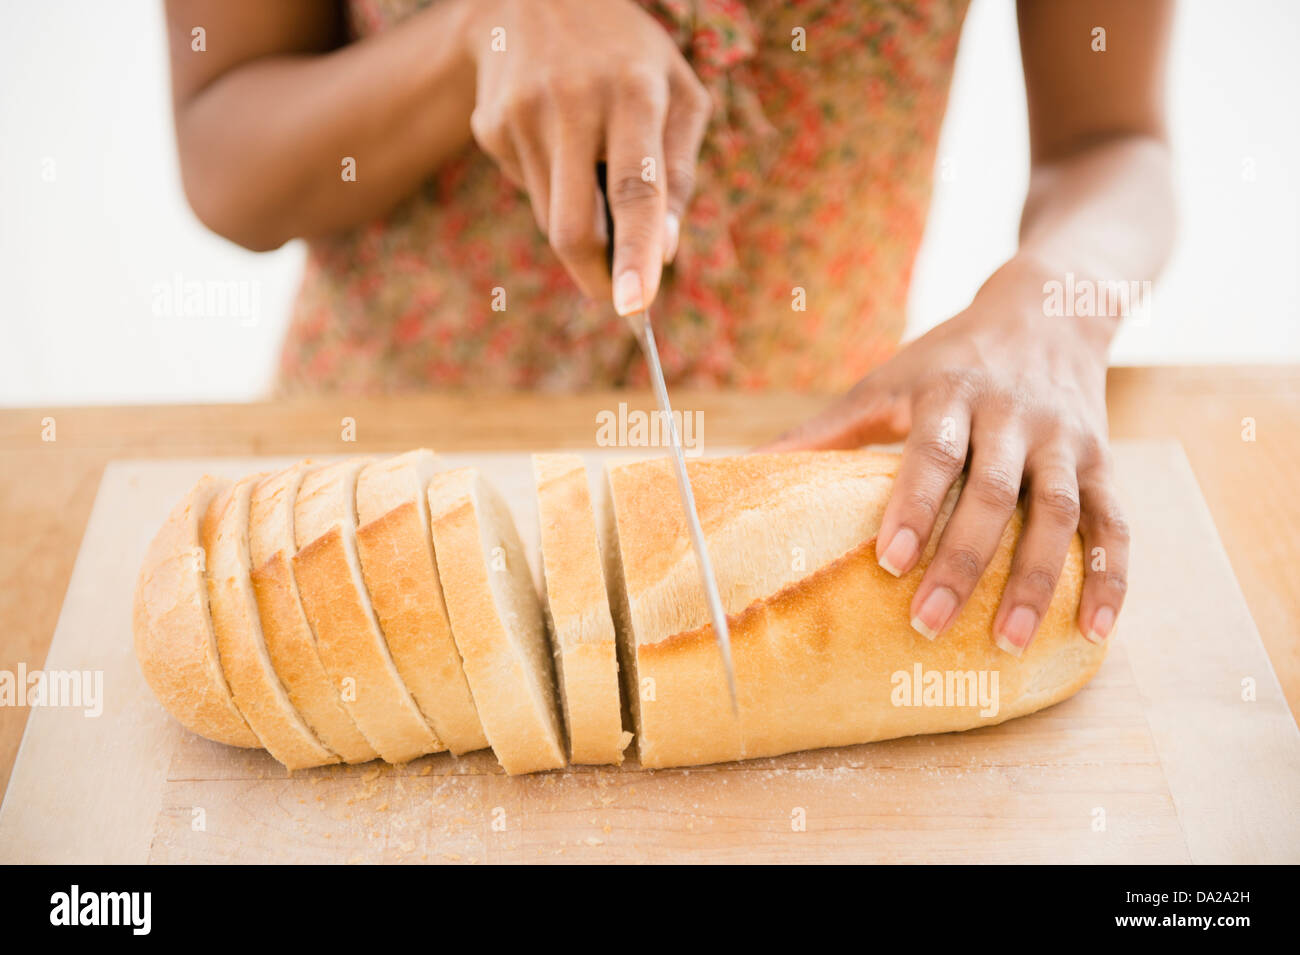 Close up of womaqn's hand cutting bread Stock Photo